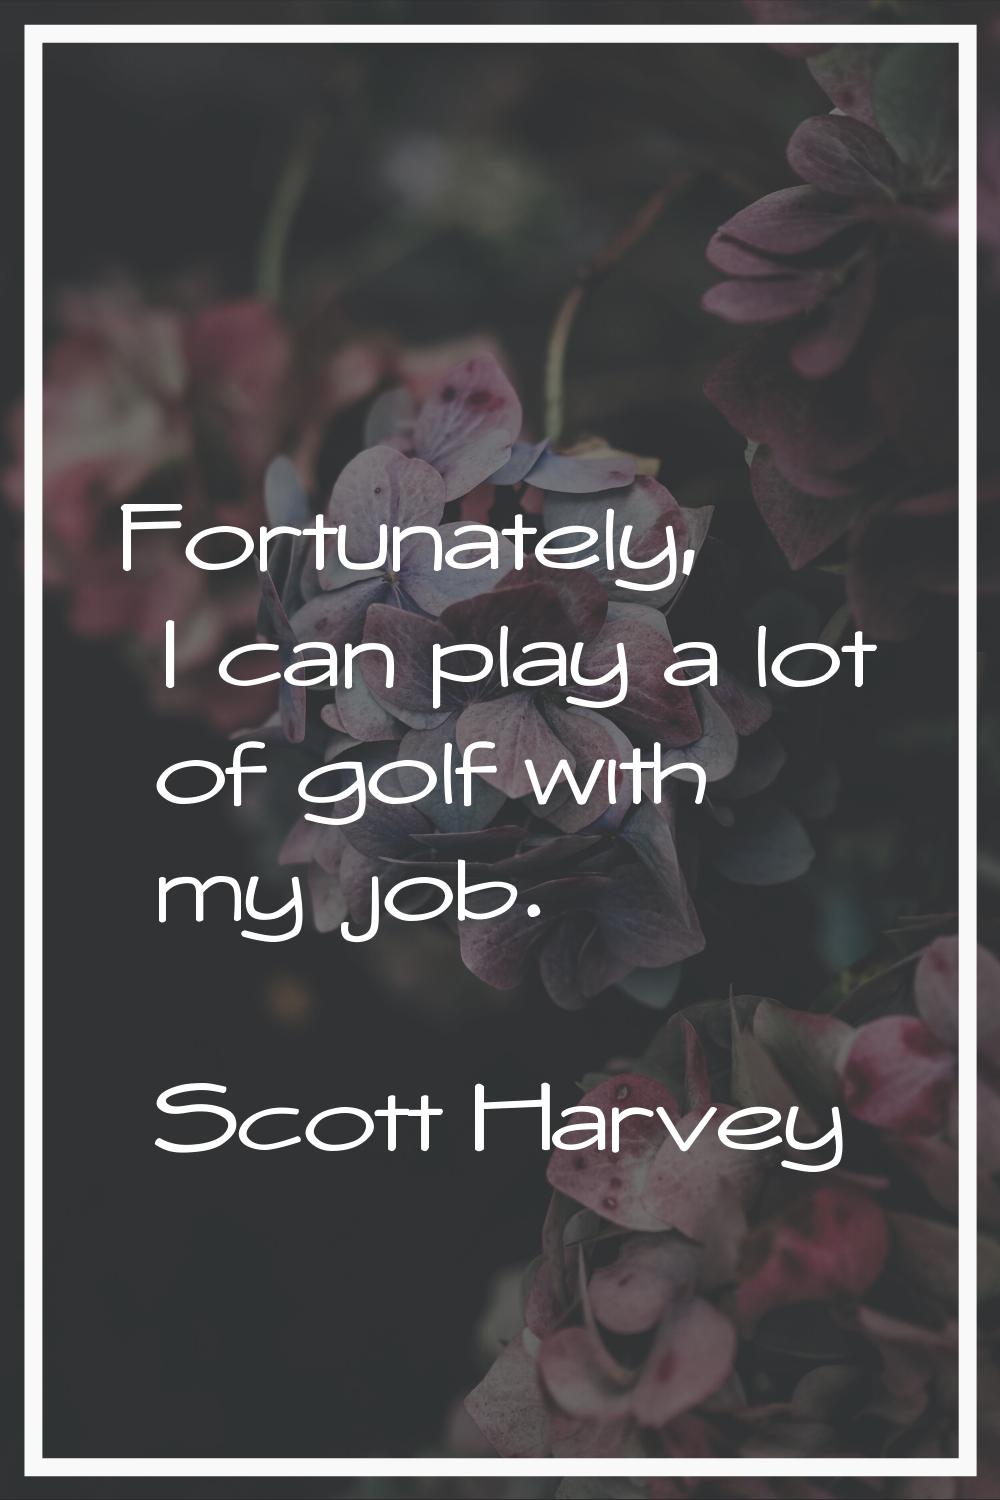 Fortunately, I can play a lot of golf with my job.